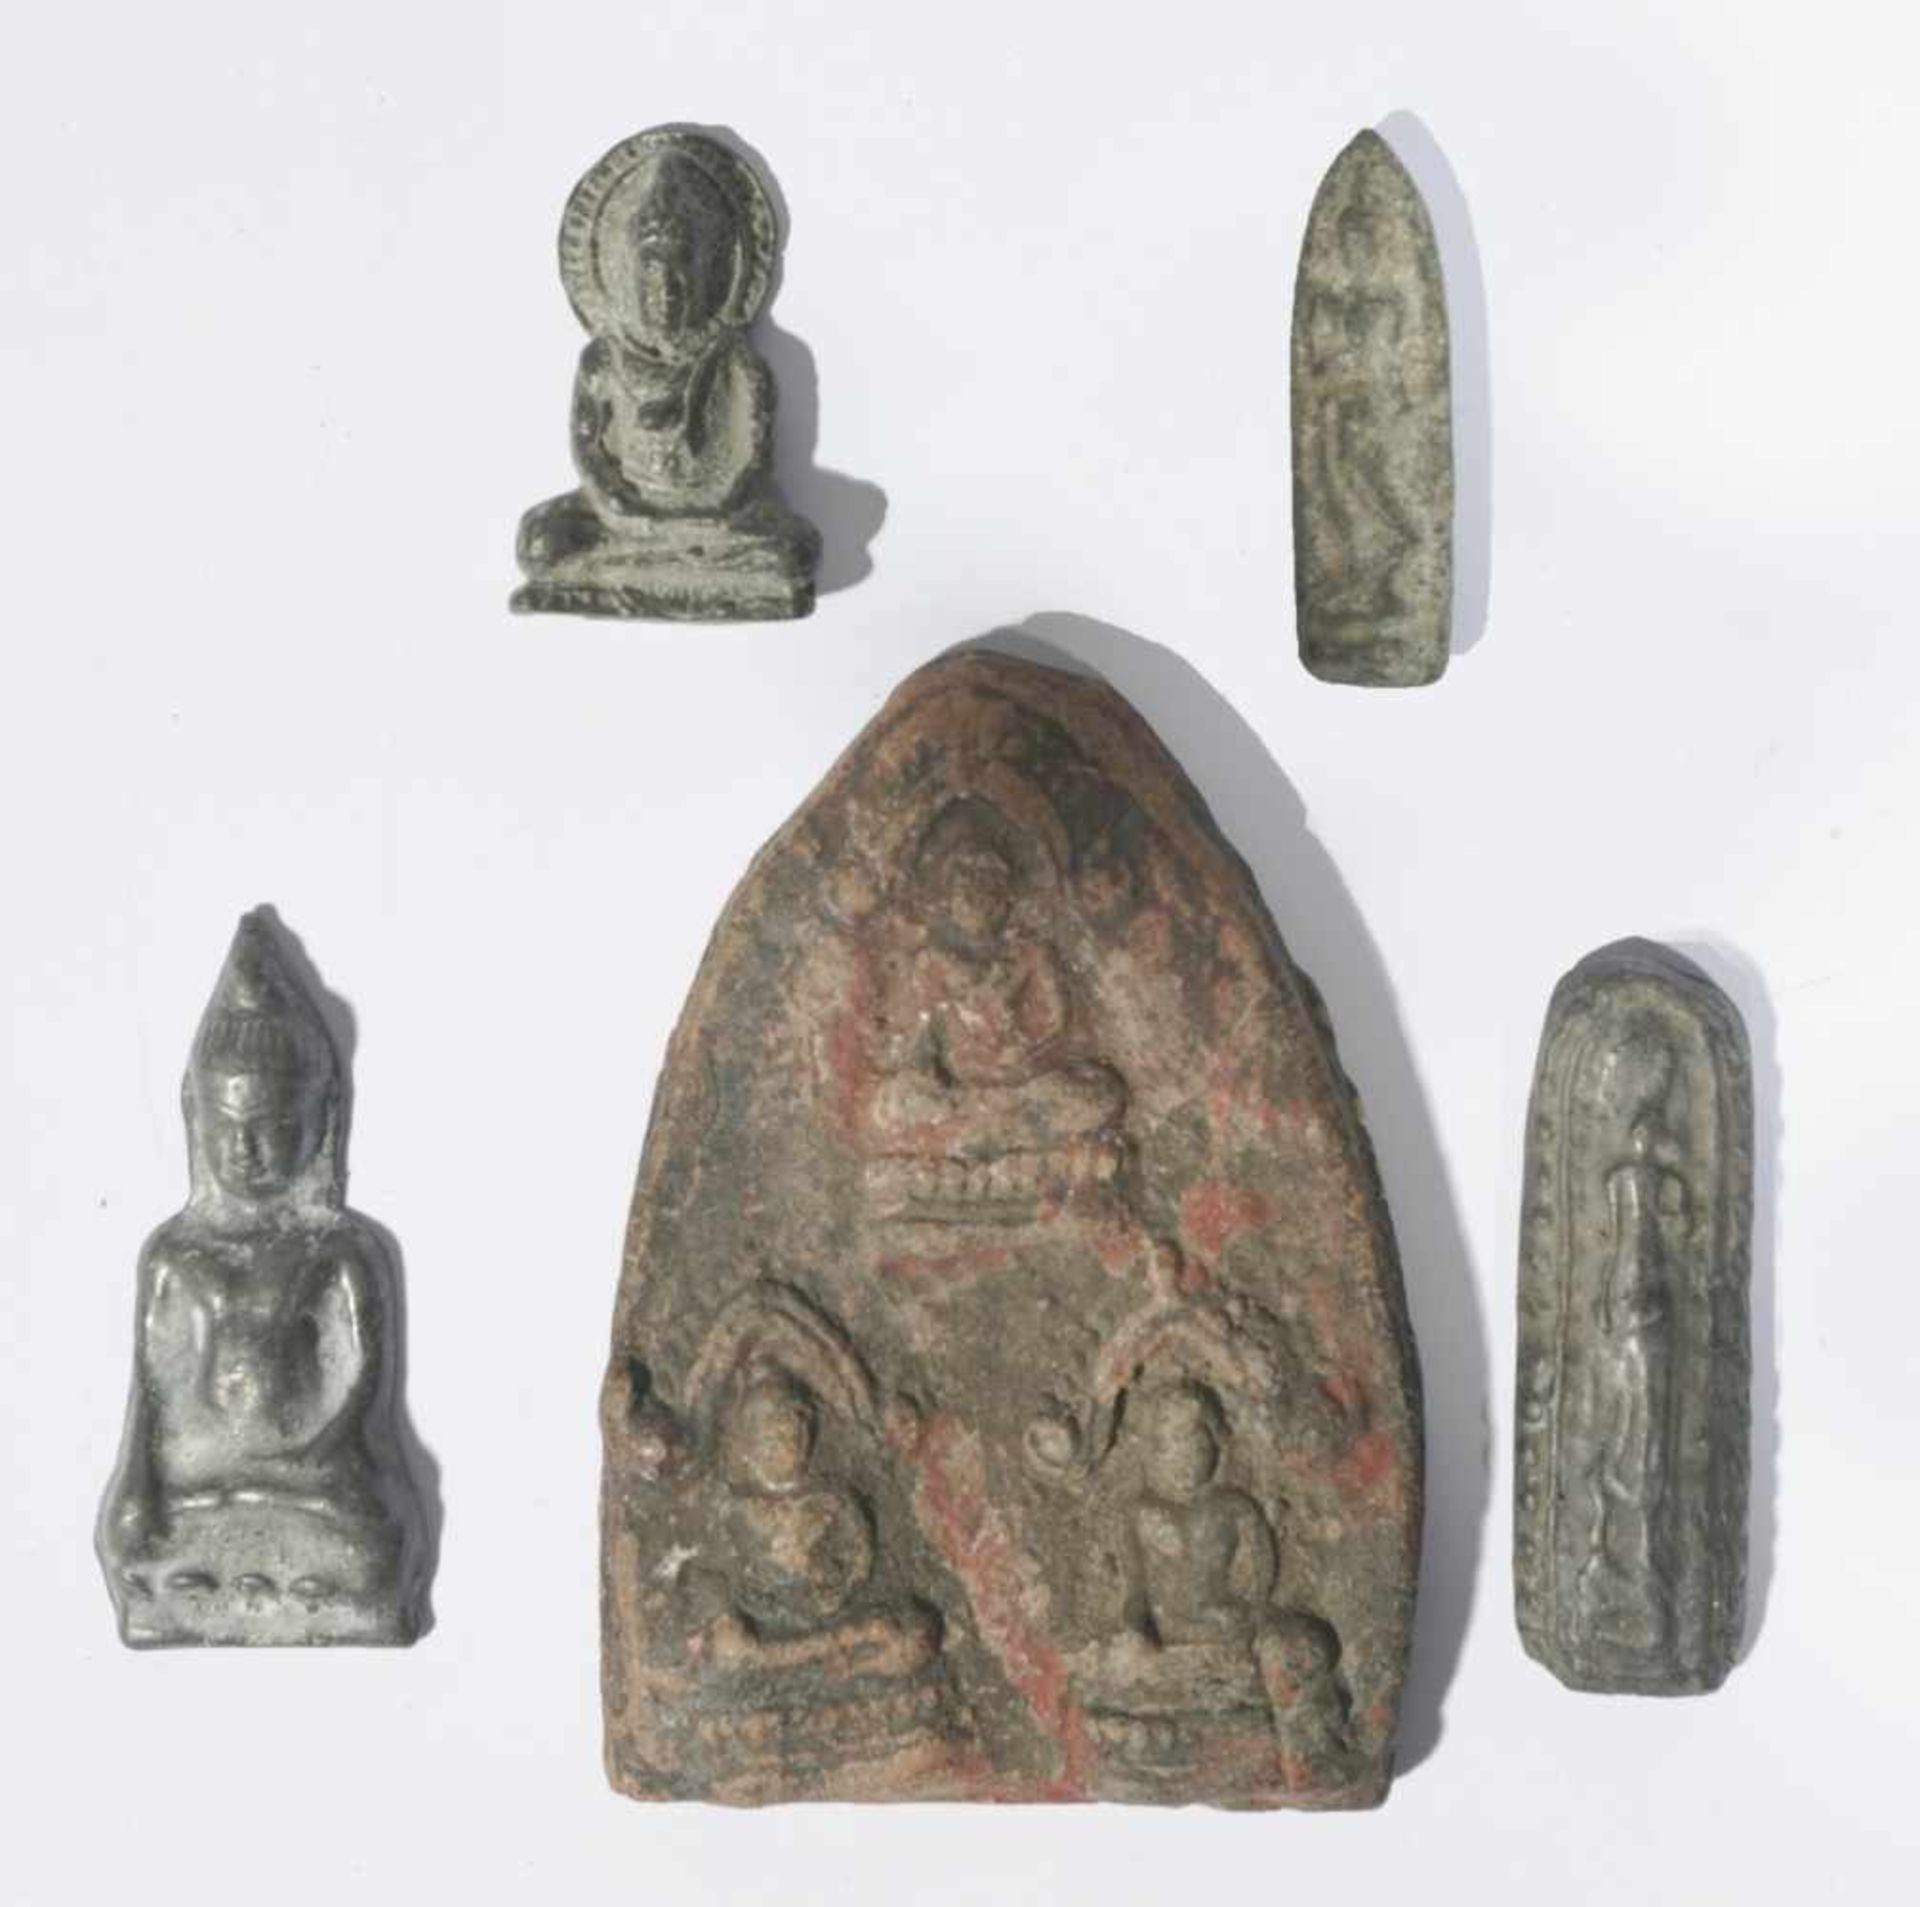 Five antique amulets, different materials, from 3,5 to 8,7 cm high, Provenance: Private